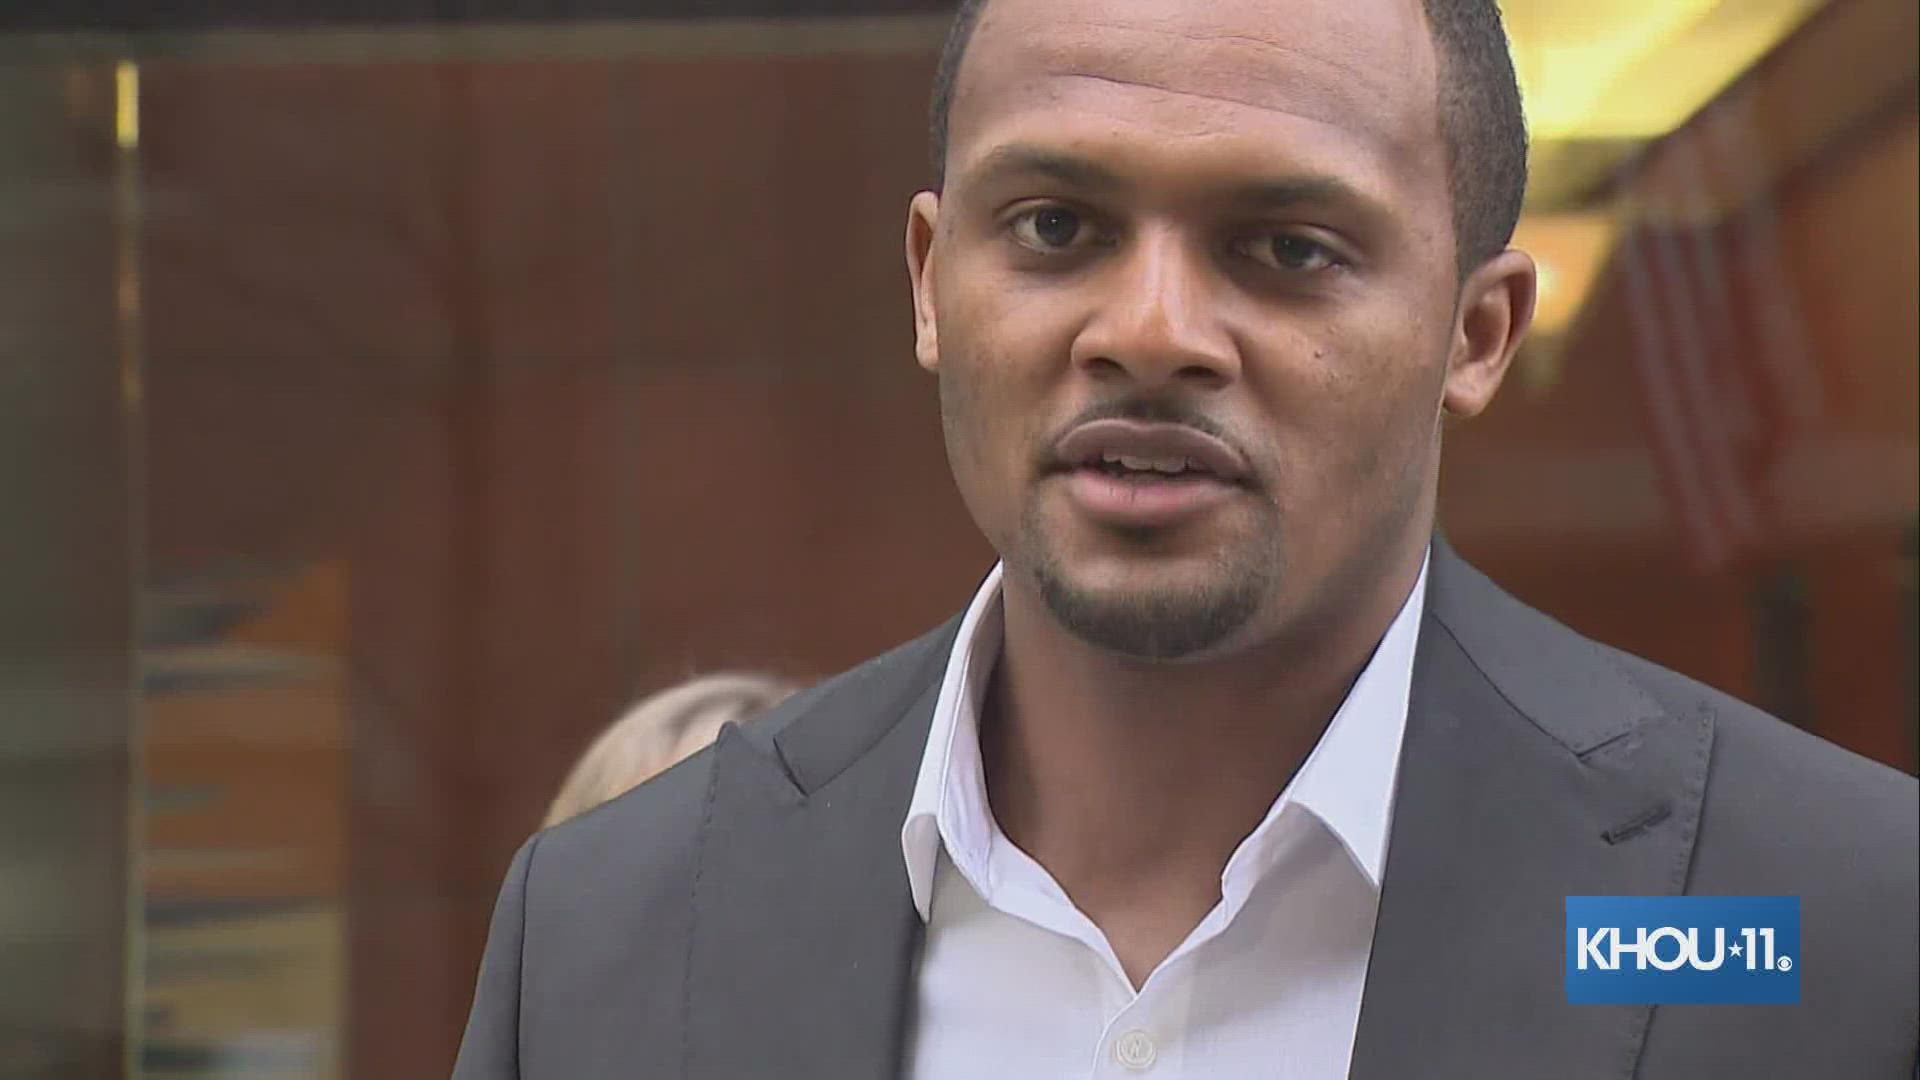 Deshaun Watson Speaks Publicly For First Time Since Accusations After Grand Jury Declines To 